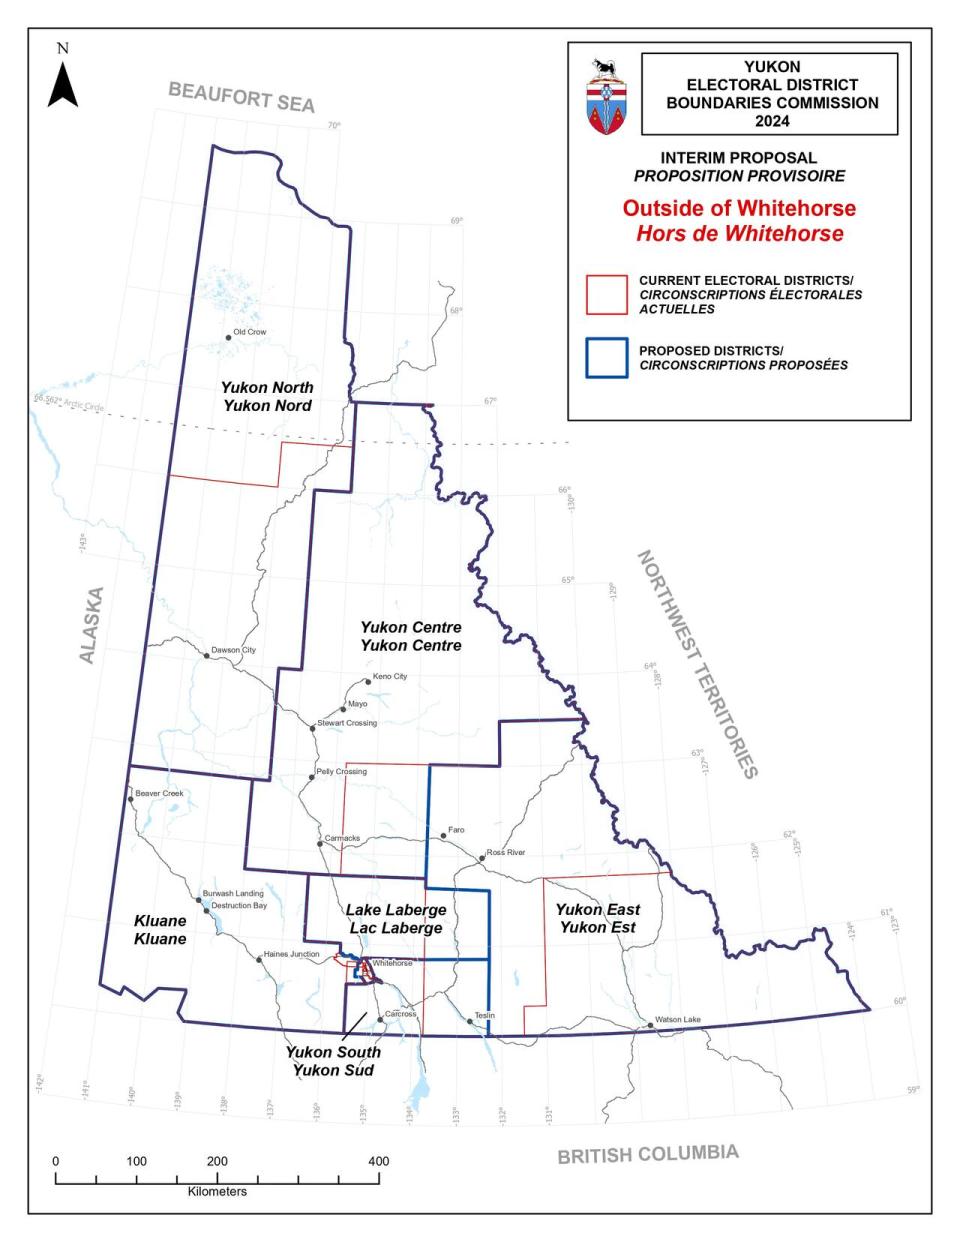 New electoral district boundaries, recommended by Yukon's Electoral District Boundaries Commission, May 2024